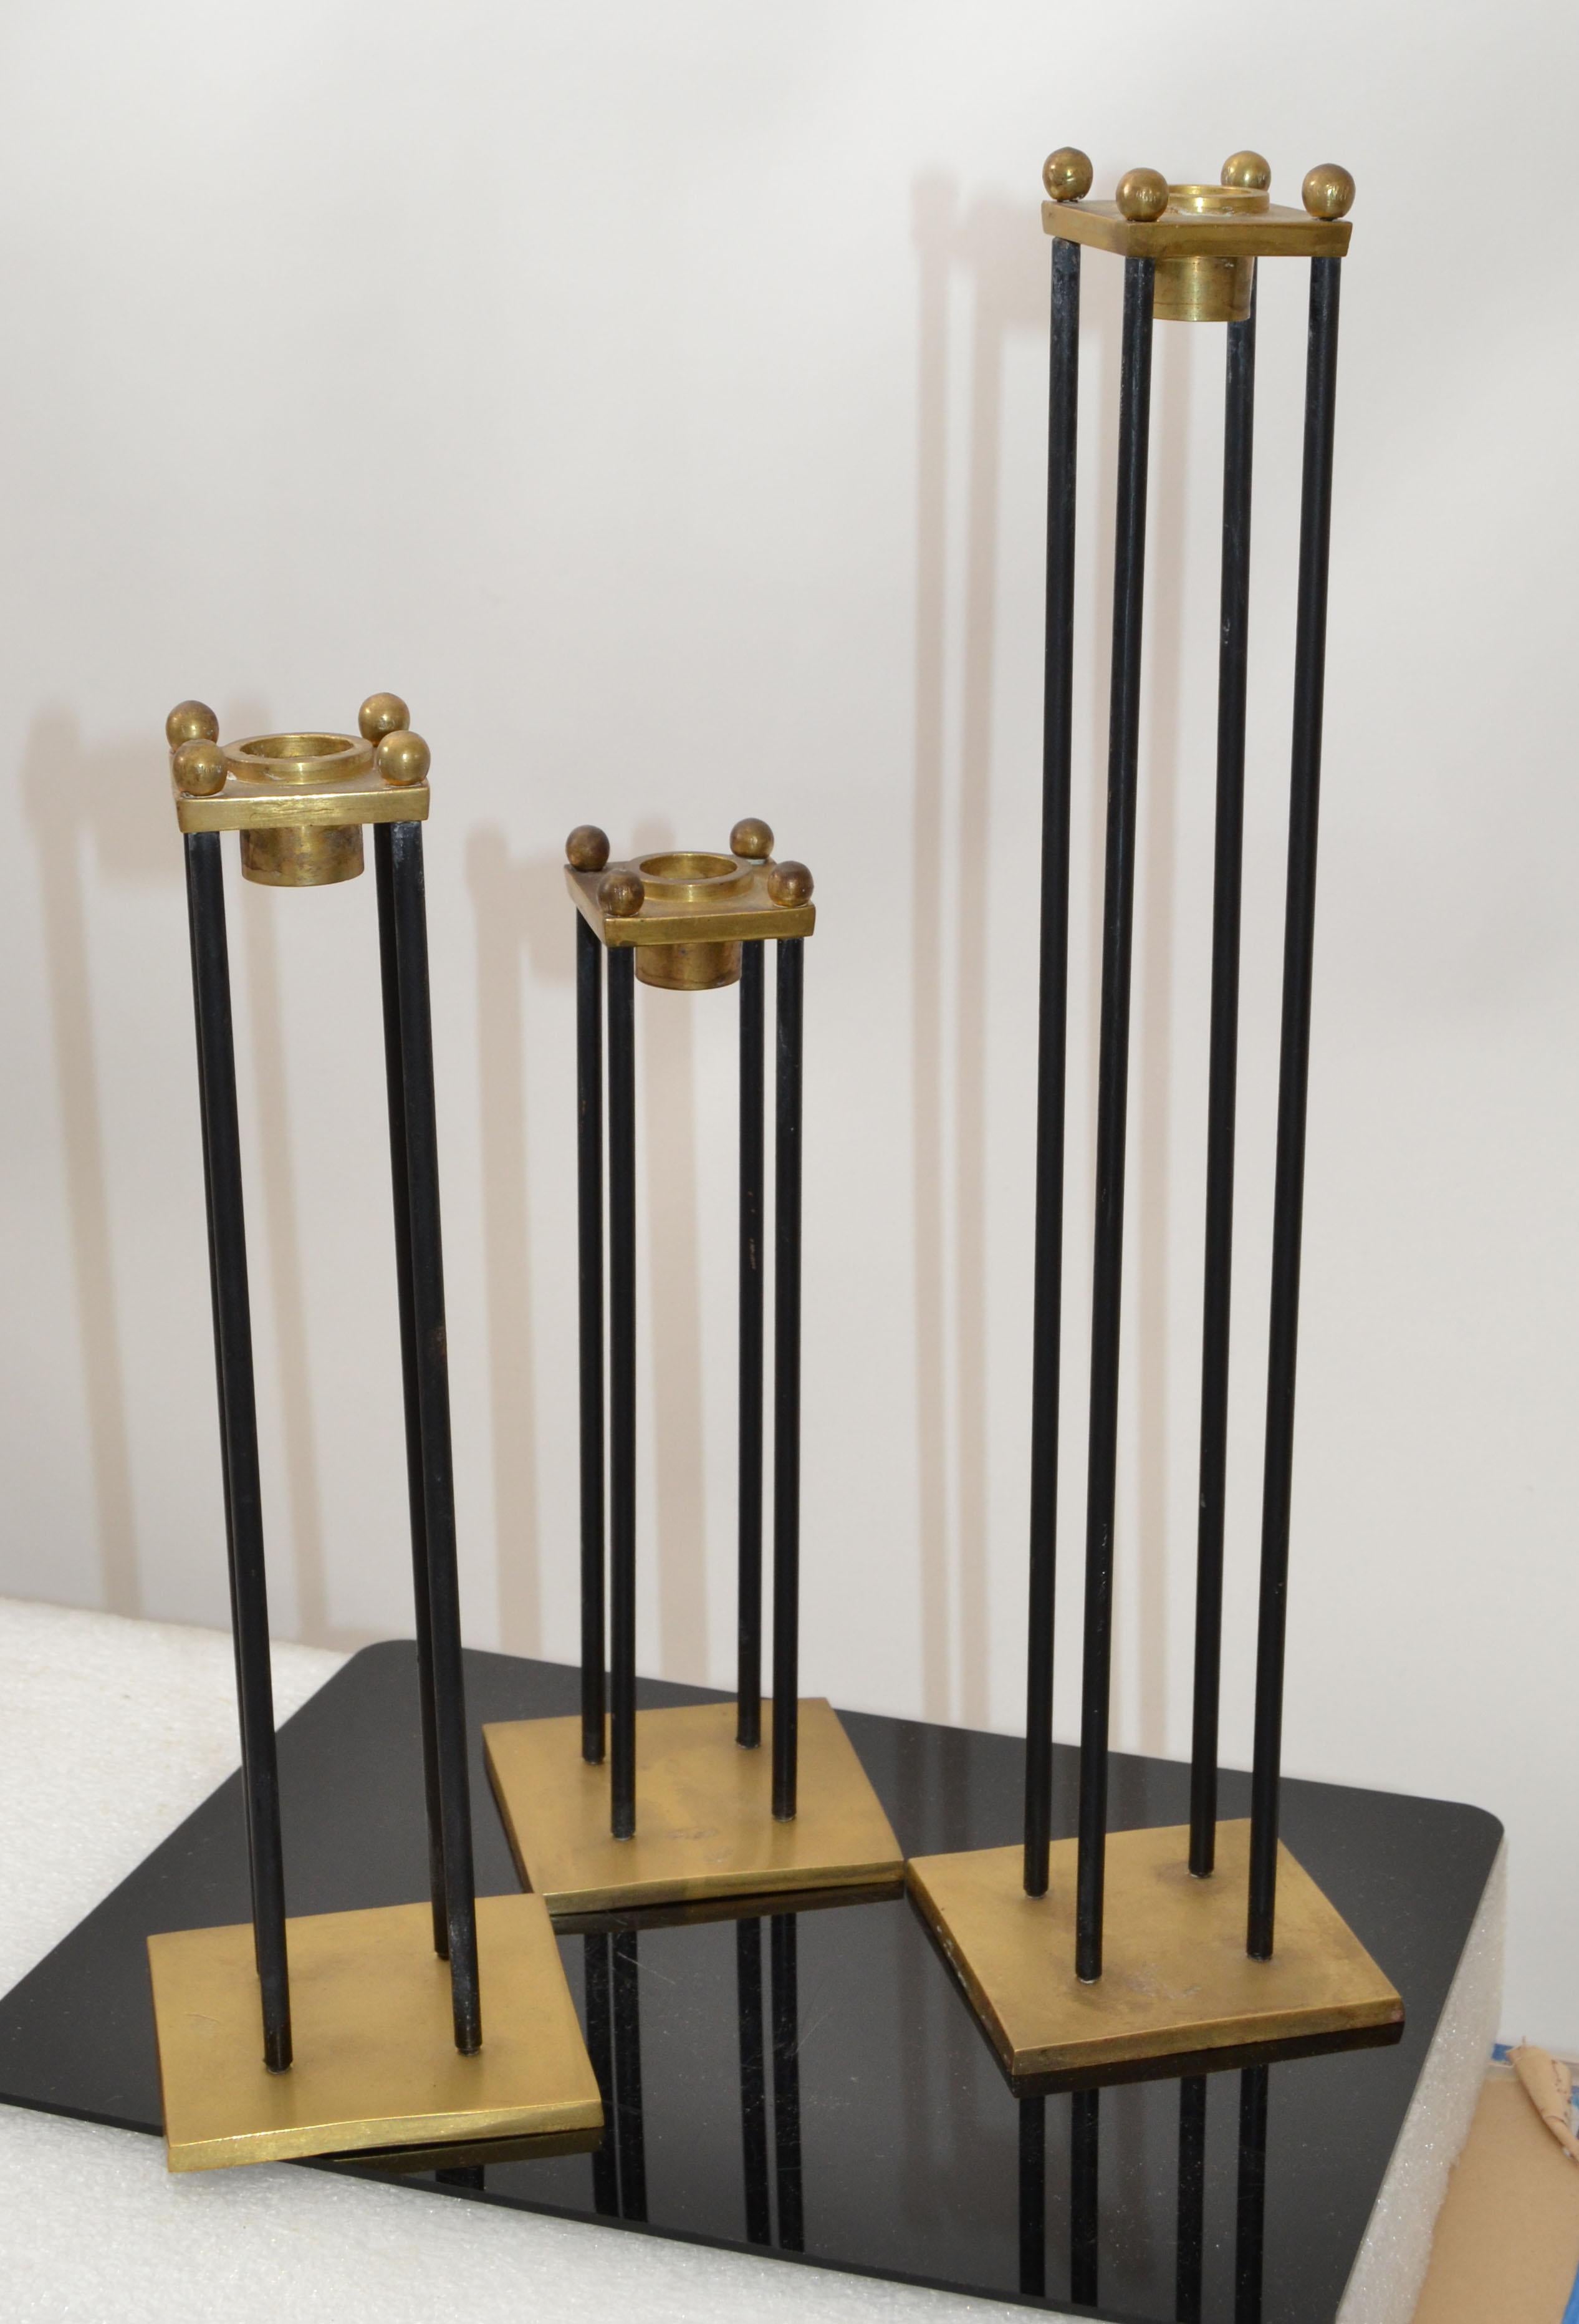 Mid-20th Century Mid-Century Modern Brass & Black Enamel Candle Holders, Candlesticks, Set of 3  For Sale